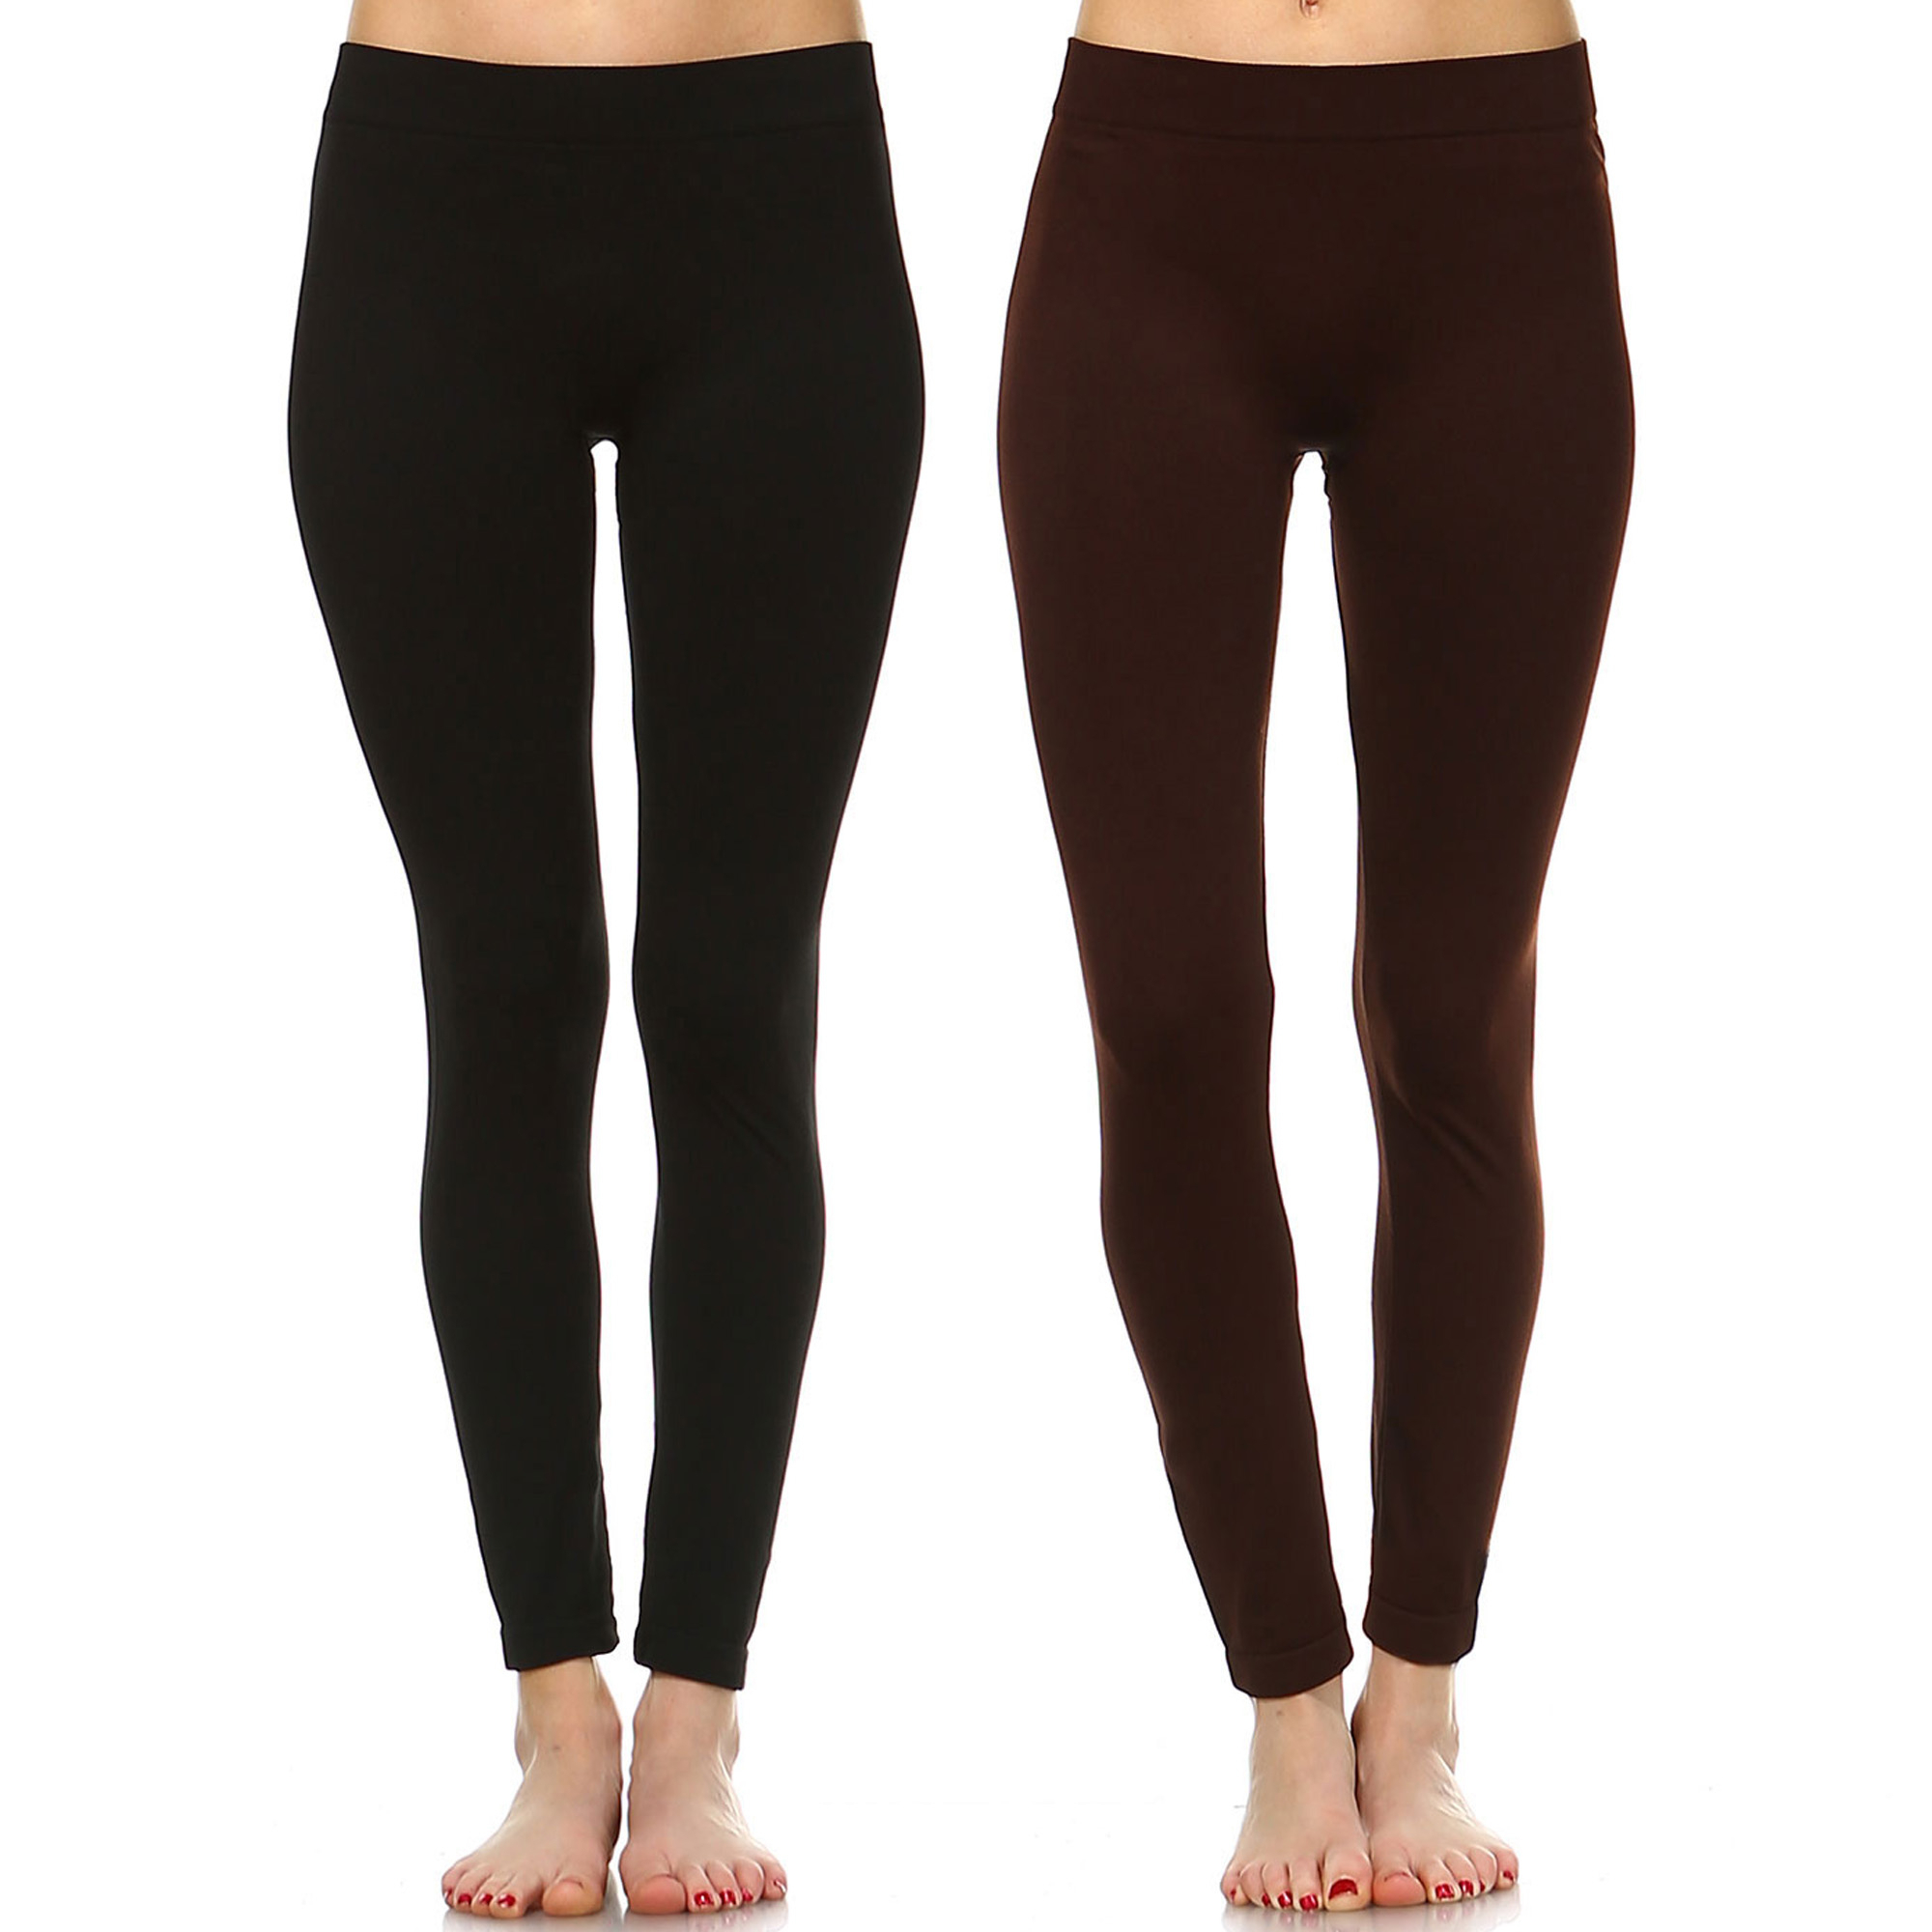 White Mark Women's Pack Of 2 Solid Color Leggings - Black, Charcoal., One Size - Plus